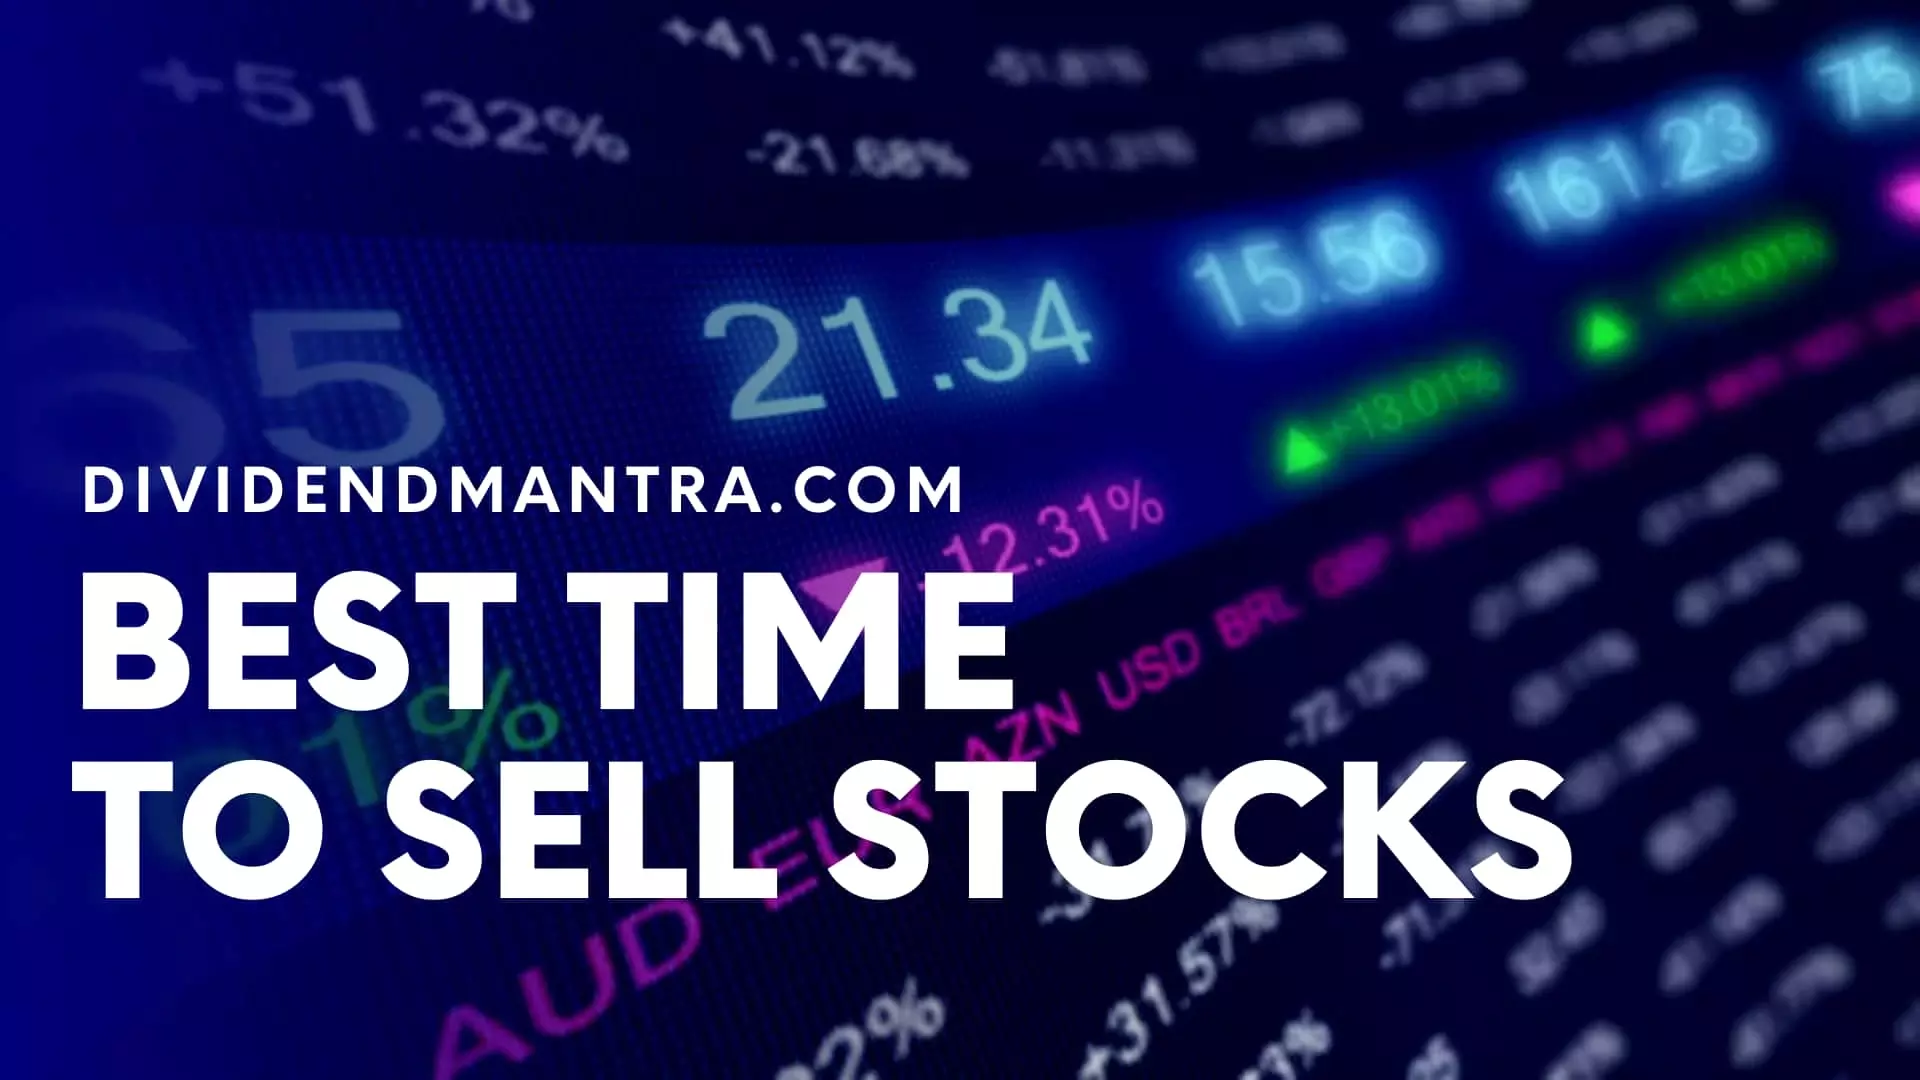 Best Time to Sell Stocks